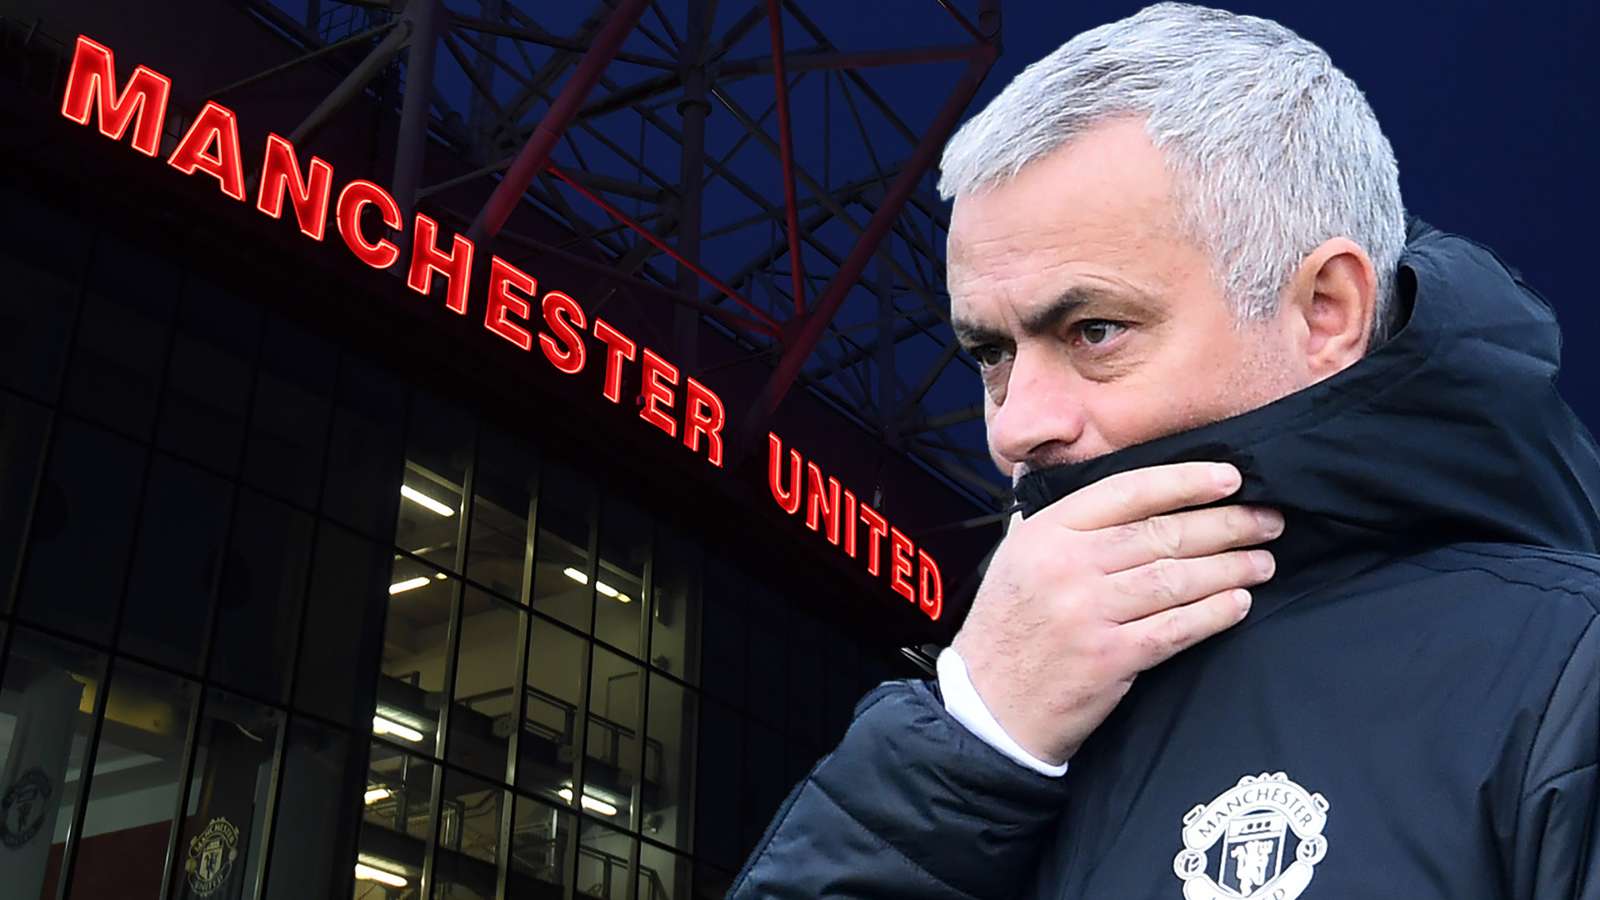 Jose Mourinho sacked by Manchester United - BREAKING NEWS 9